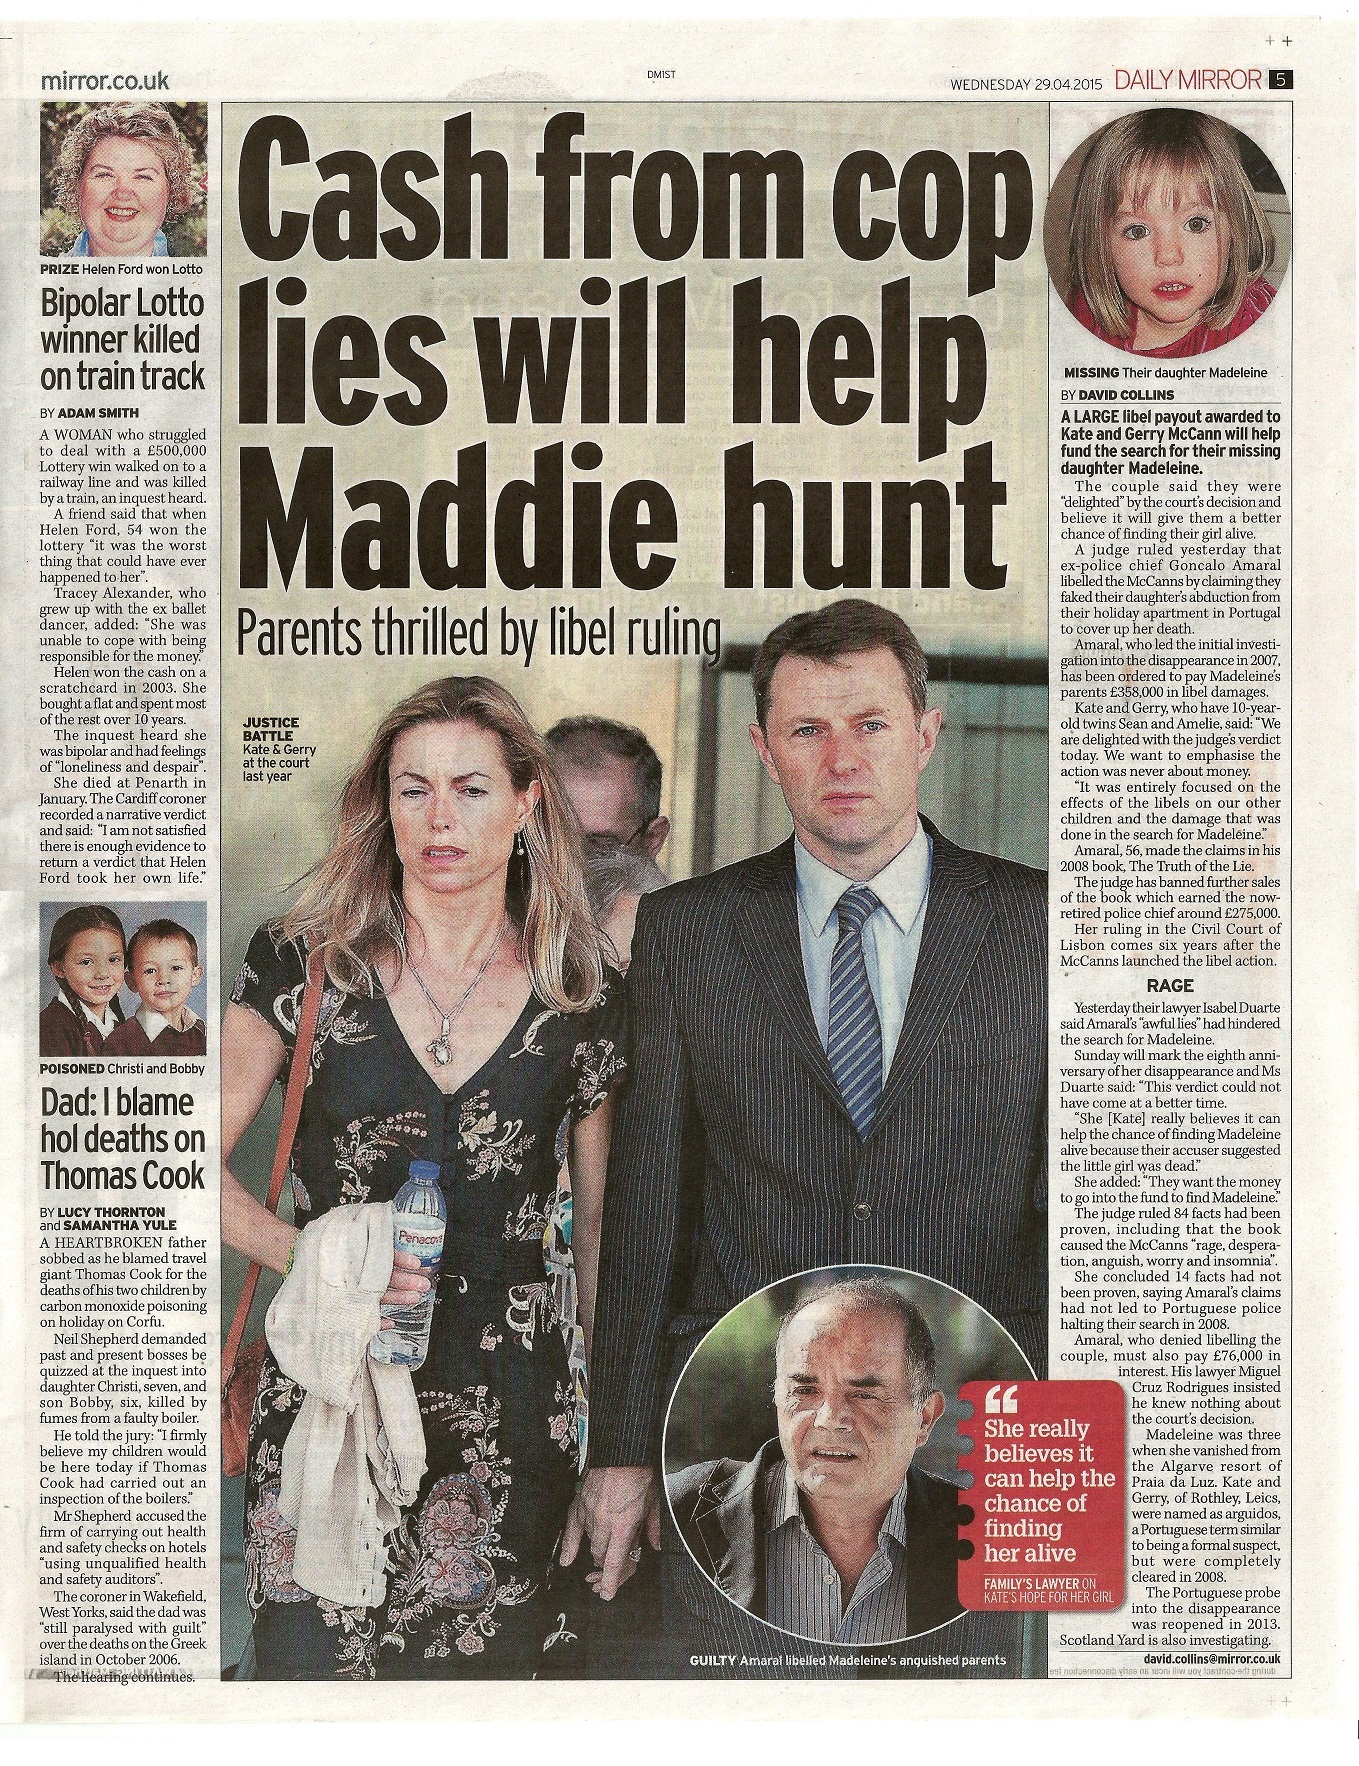 Cash from cop lies will help Maddie hunt Daily Mirror (paper edition, page 5)